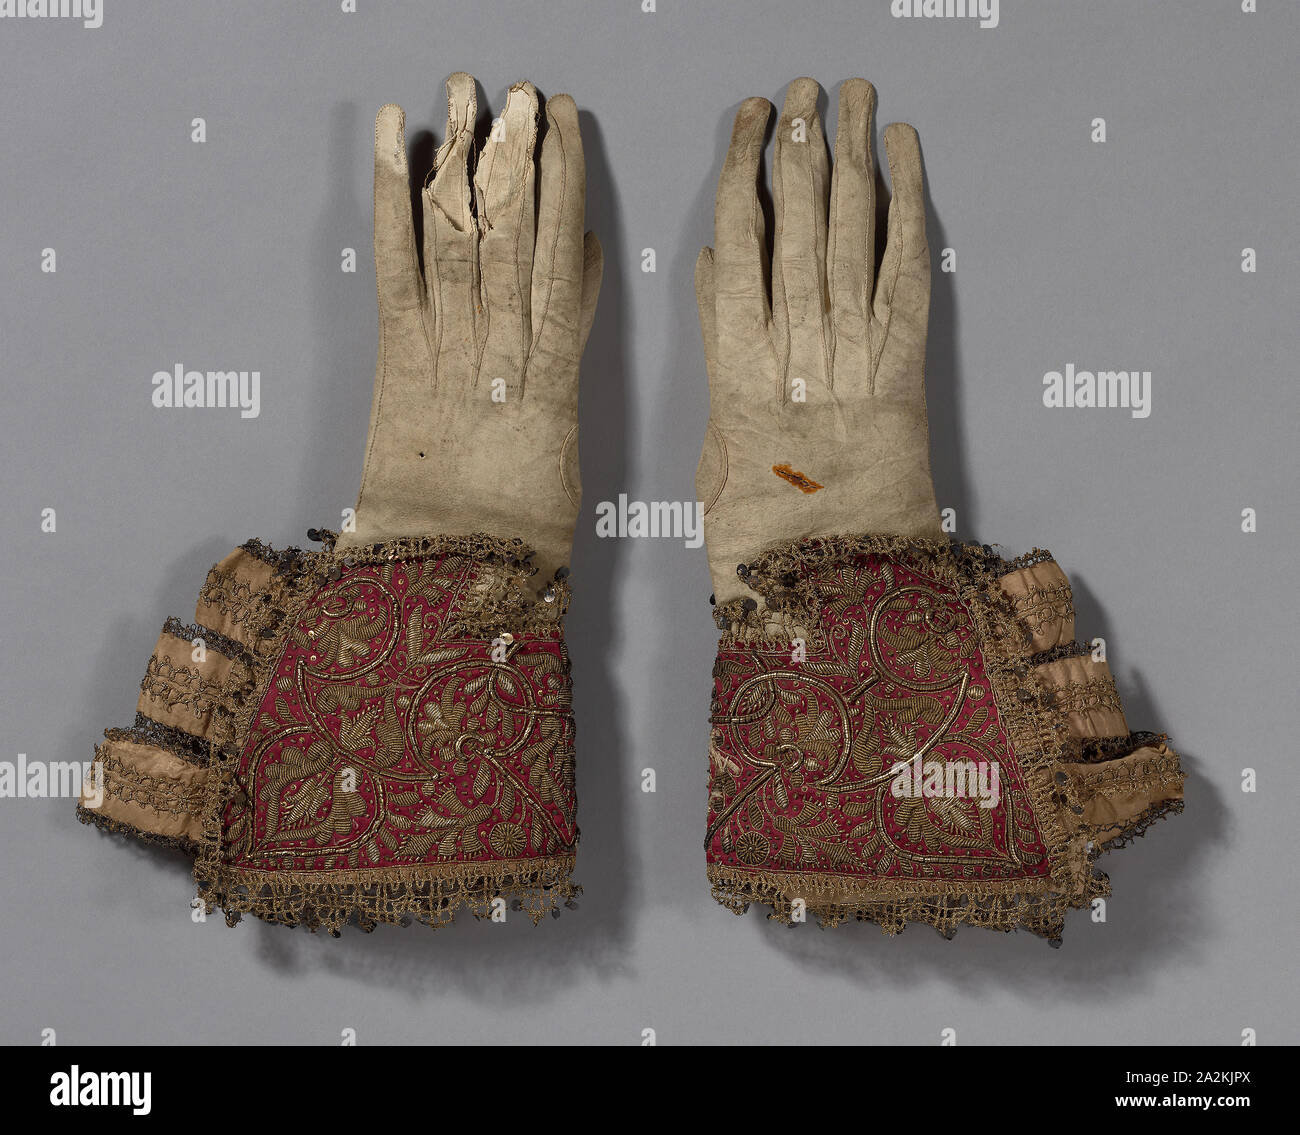 Pair of Men’s Gloves, 1600/50, England, Gloves: leather, Gauntlets: silk, satin weave, embroidered with linen, gilt-metal-coiled wire and strips, and gilt-metal-strip-wrapped silk in couching and padded couching, ribbons of silk, plain weave, edged with gilt-metal-strip-wrapped silk, bobbin straight lace, metal spangles, a: 35.5 × 19.2 cm (14 × 7 1/2 in Stock Photo